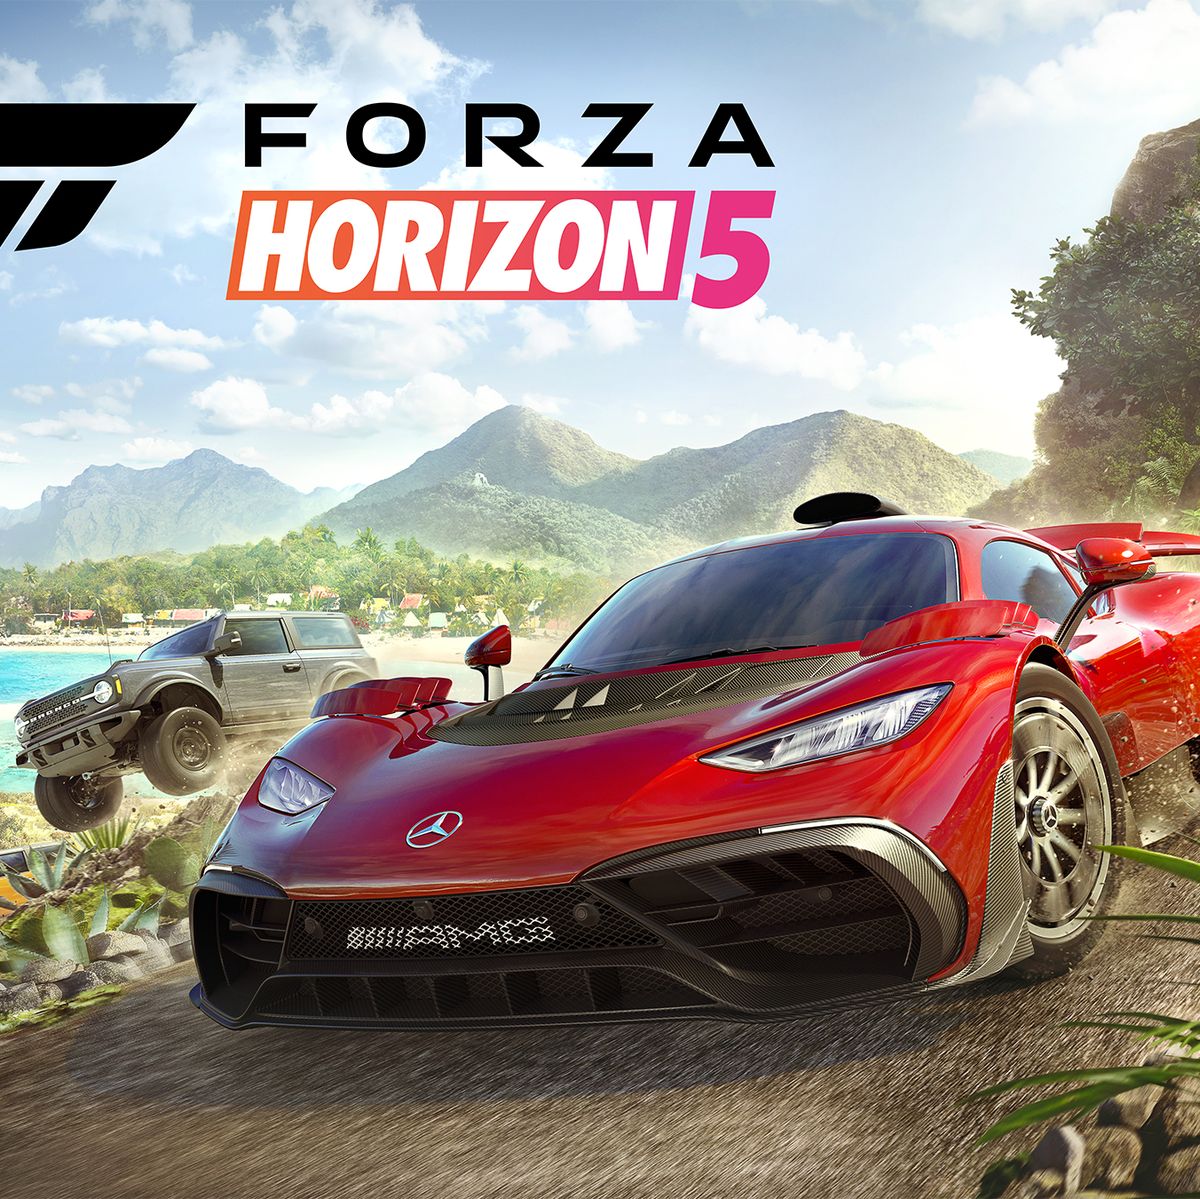 Forza Horizon 5' Is Coming: Watch the Gameplay and Cover Art Reveal